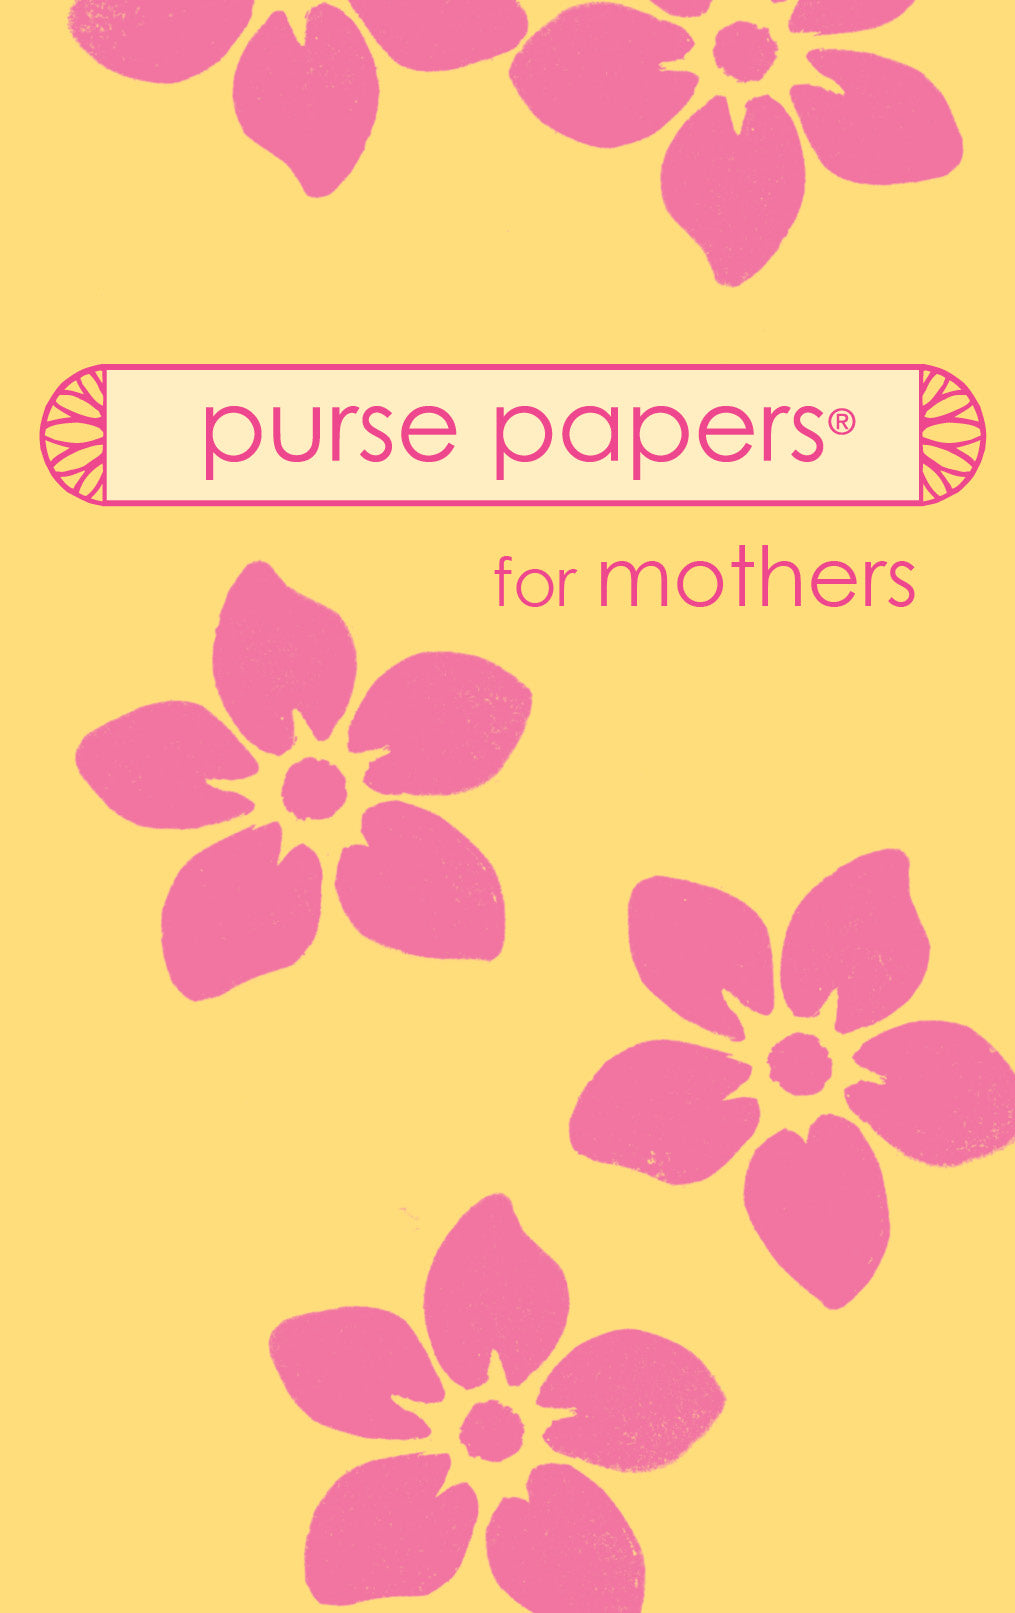 Purse Papers for mothers